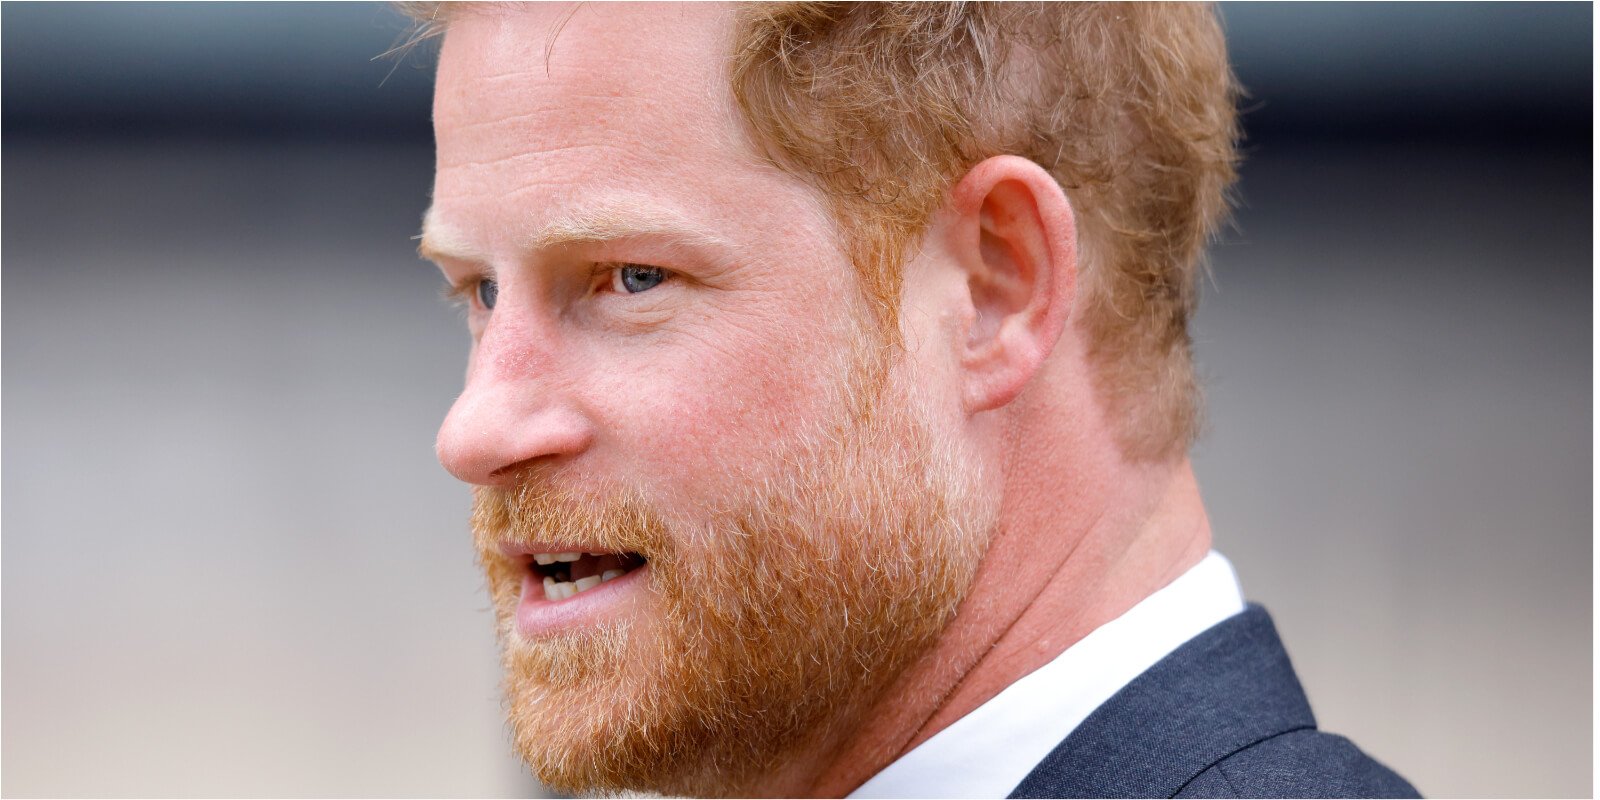 Prince Harry will attend King Charles' coronation without his wife Meghan Markle and their children Prince Archie and Princess Lilibet.